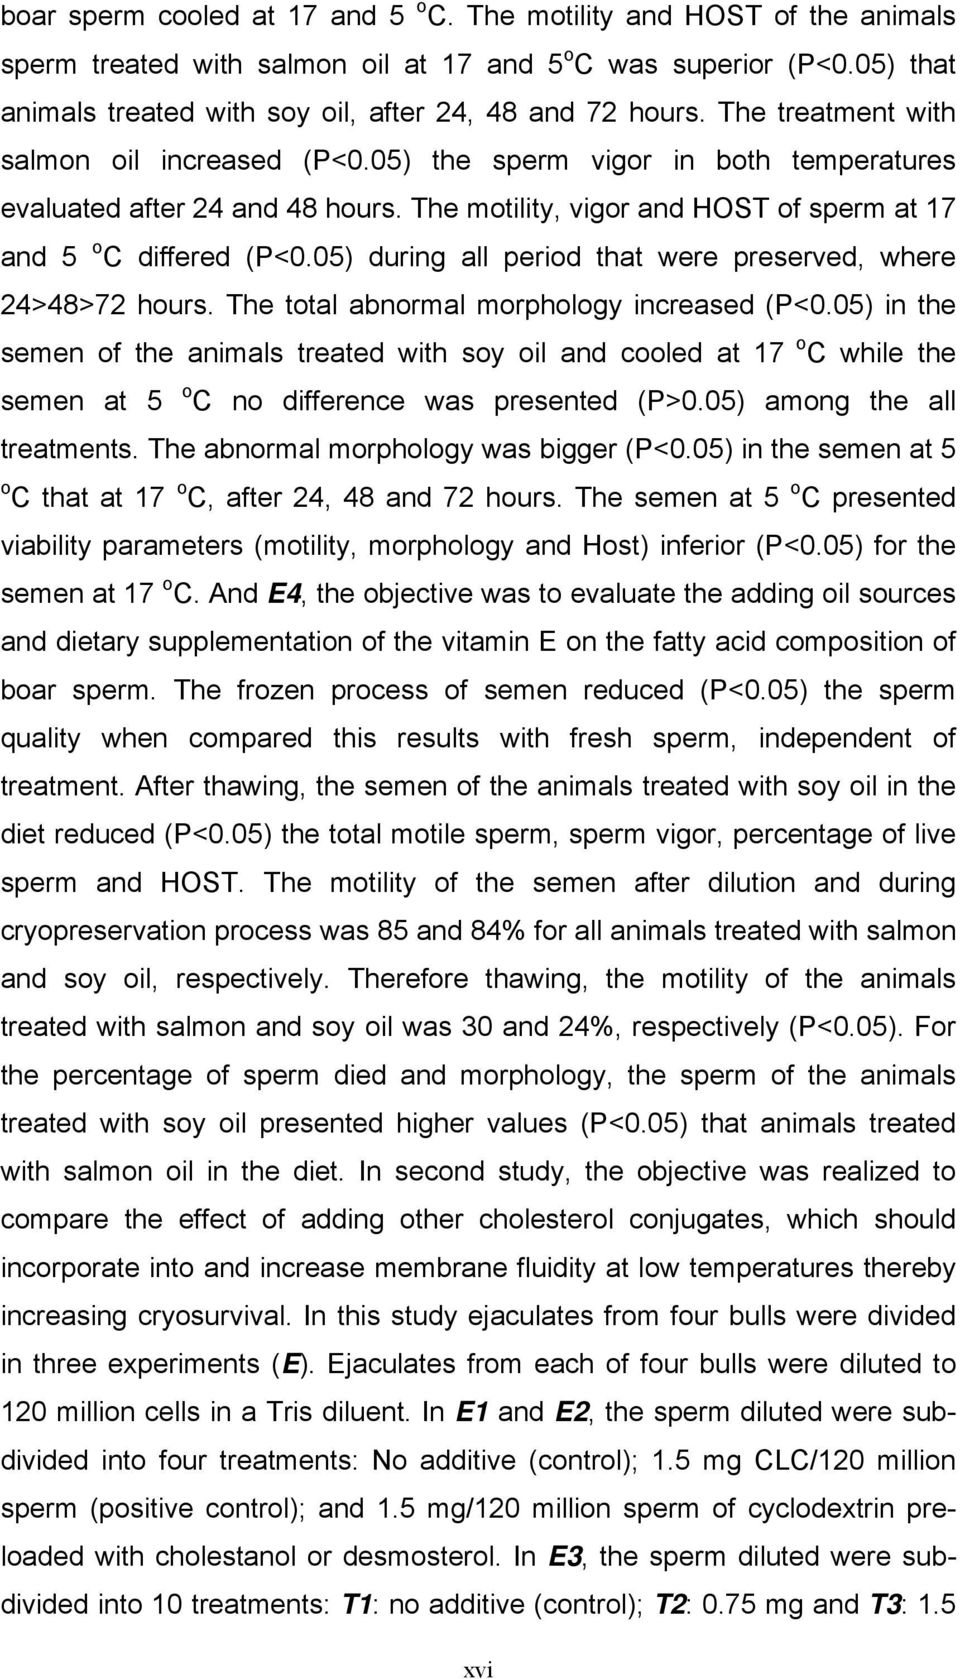 The motility, vigor and HOST of sperm at 17 and 5 o C differed (P<0.05) during all period that were preserved, where 24>48>72 hours. The total abnormal morphology increased (P<0.